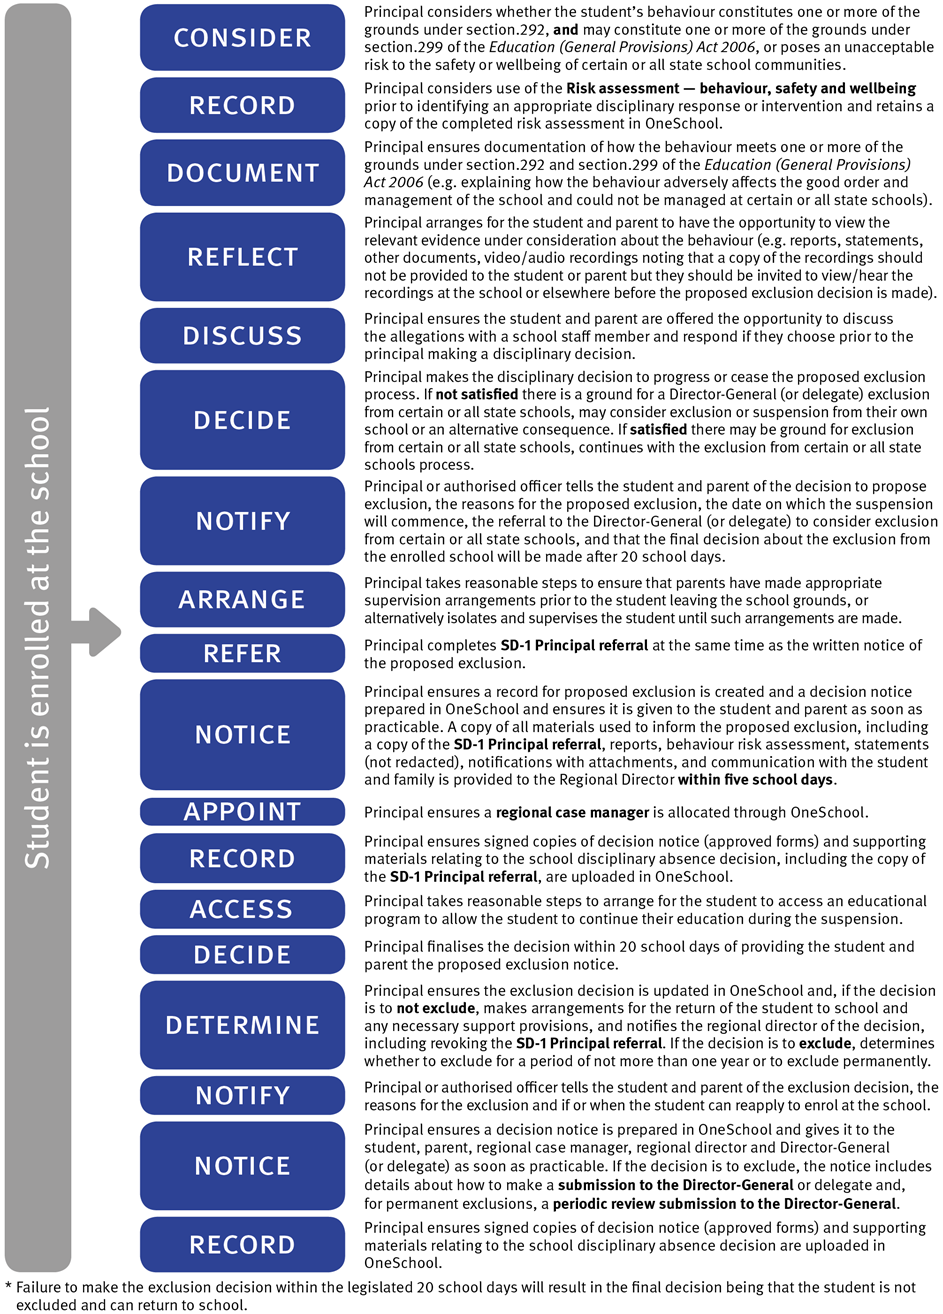 Flowchart of process for exclusion by the Director-General (or delegate) for certain Queensland state schools or all state schools where a student is enrolled at the school: 1. Consider 2. Record 3. Document 4. Reflect 5. Discuss 6. Decide 7. Notify 8. Arrange 9. Refer 10. Notice 11. Appoint 12. Record 13. Access 14. Decide 15. Determine 16. Notify 17. Notice 18. Record